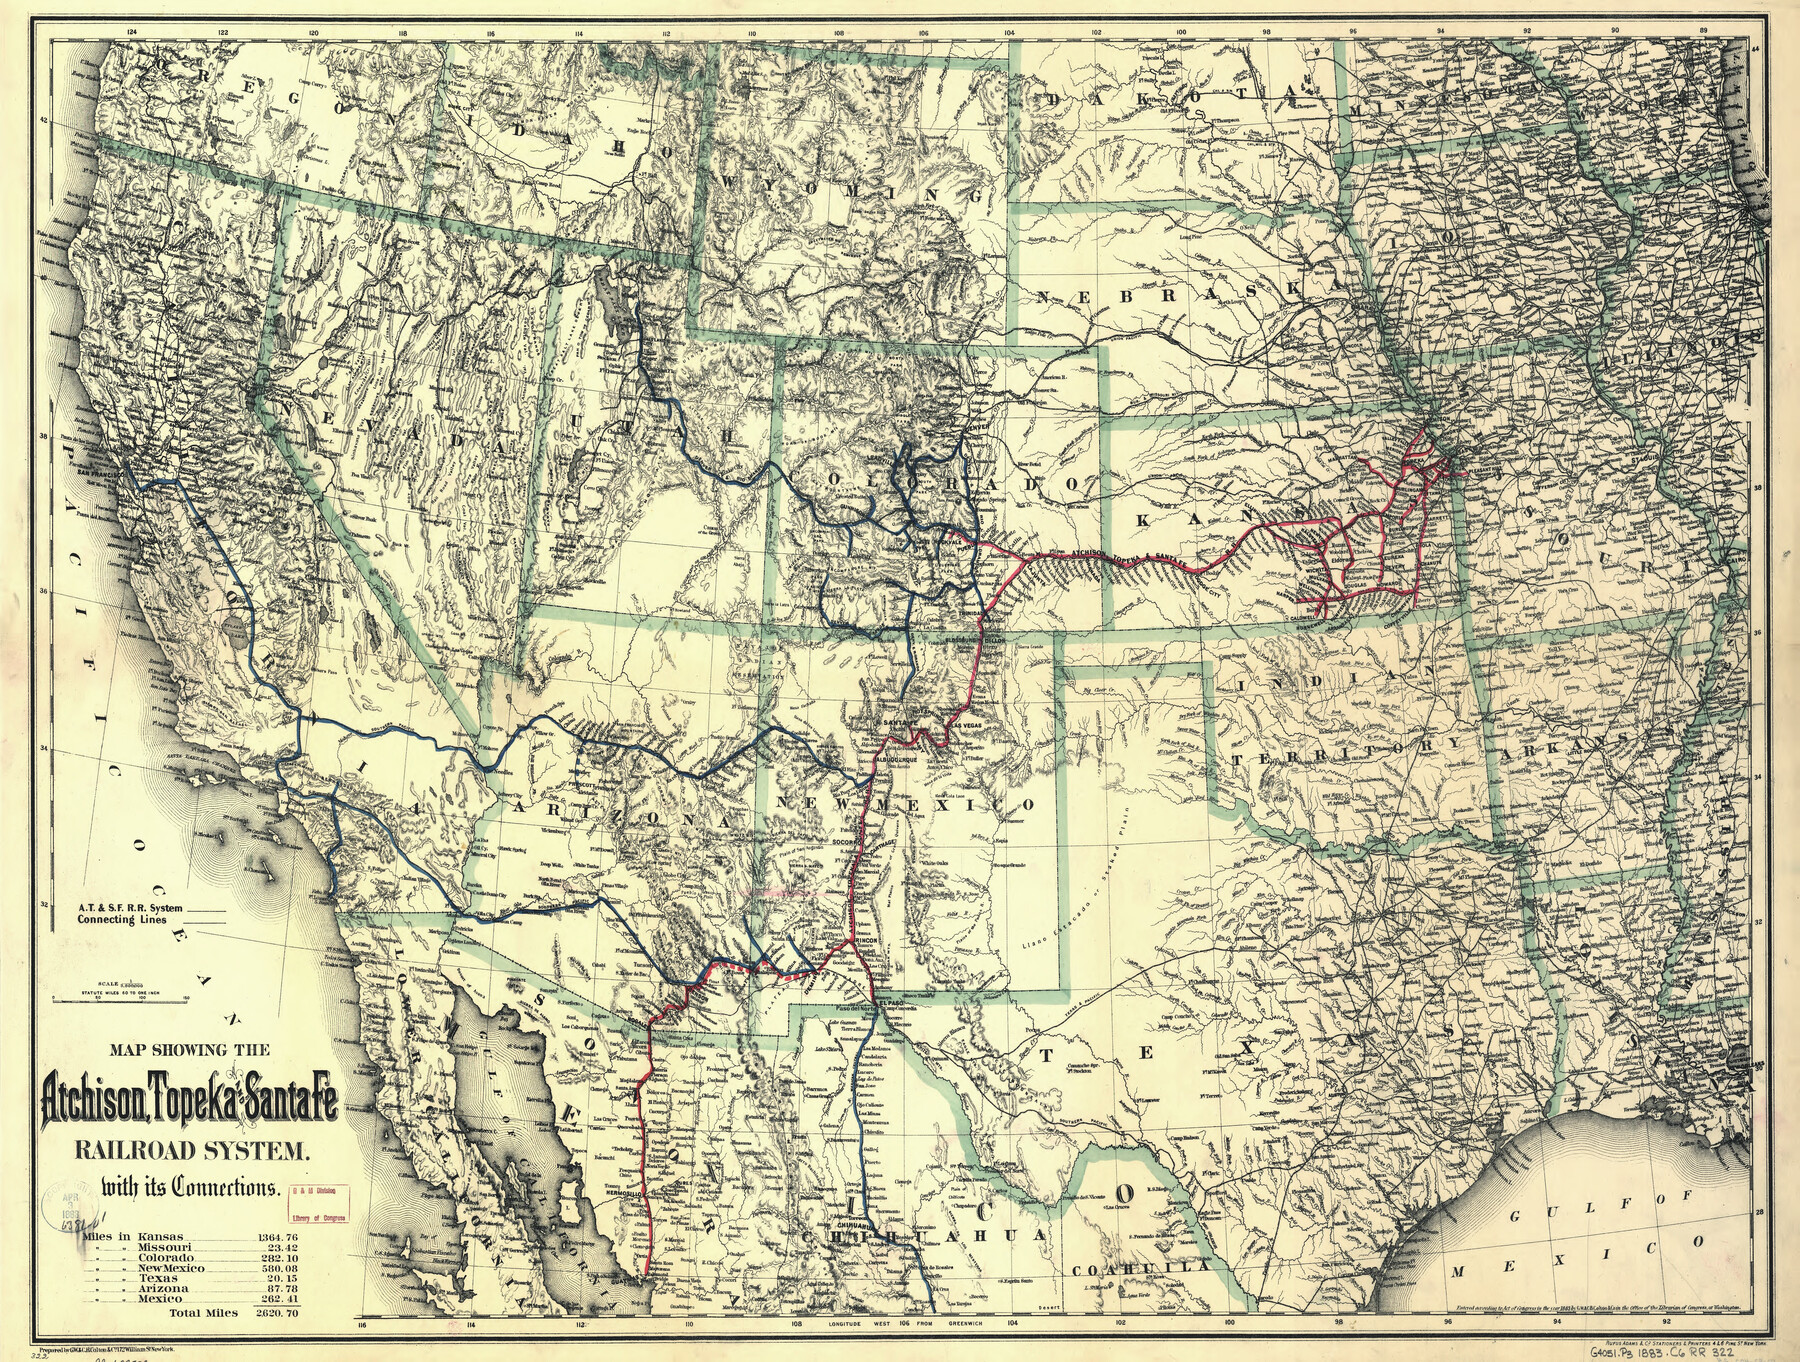 93583, Map showing the Atchison, Topeka and Santa Fe Railroad system, with its connections., Library of Congress